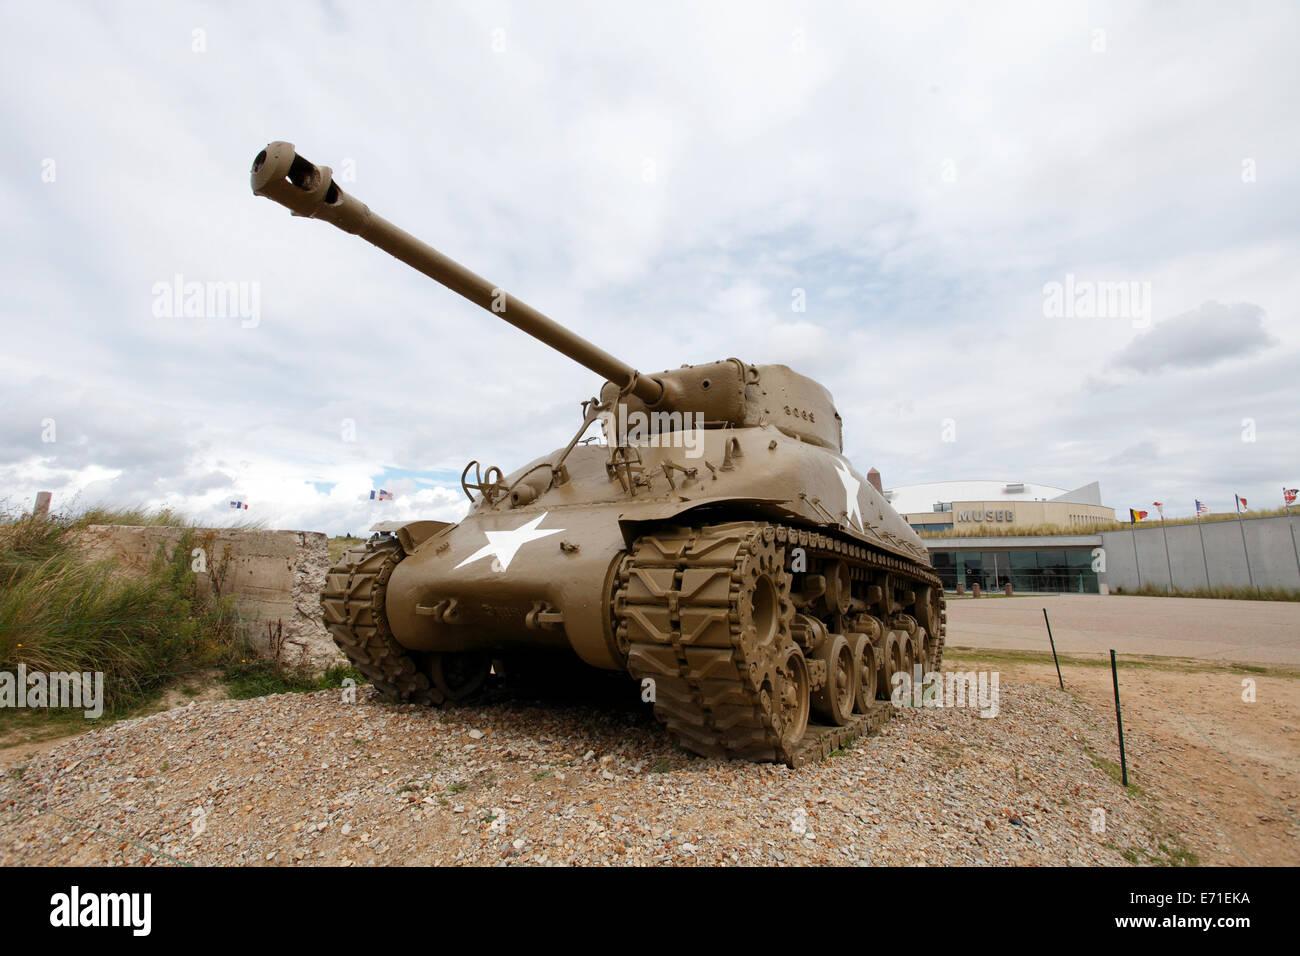 Utah Beach, Normandy France. Sherman Tank in the foreground. Museum Stock Photo